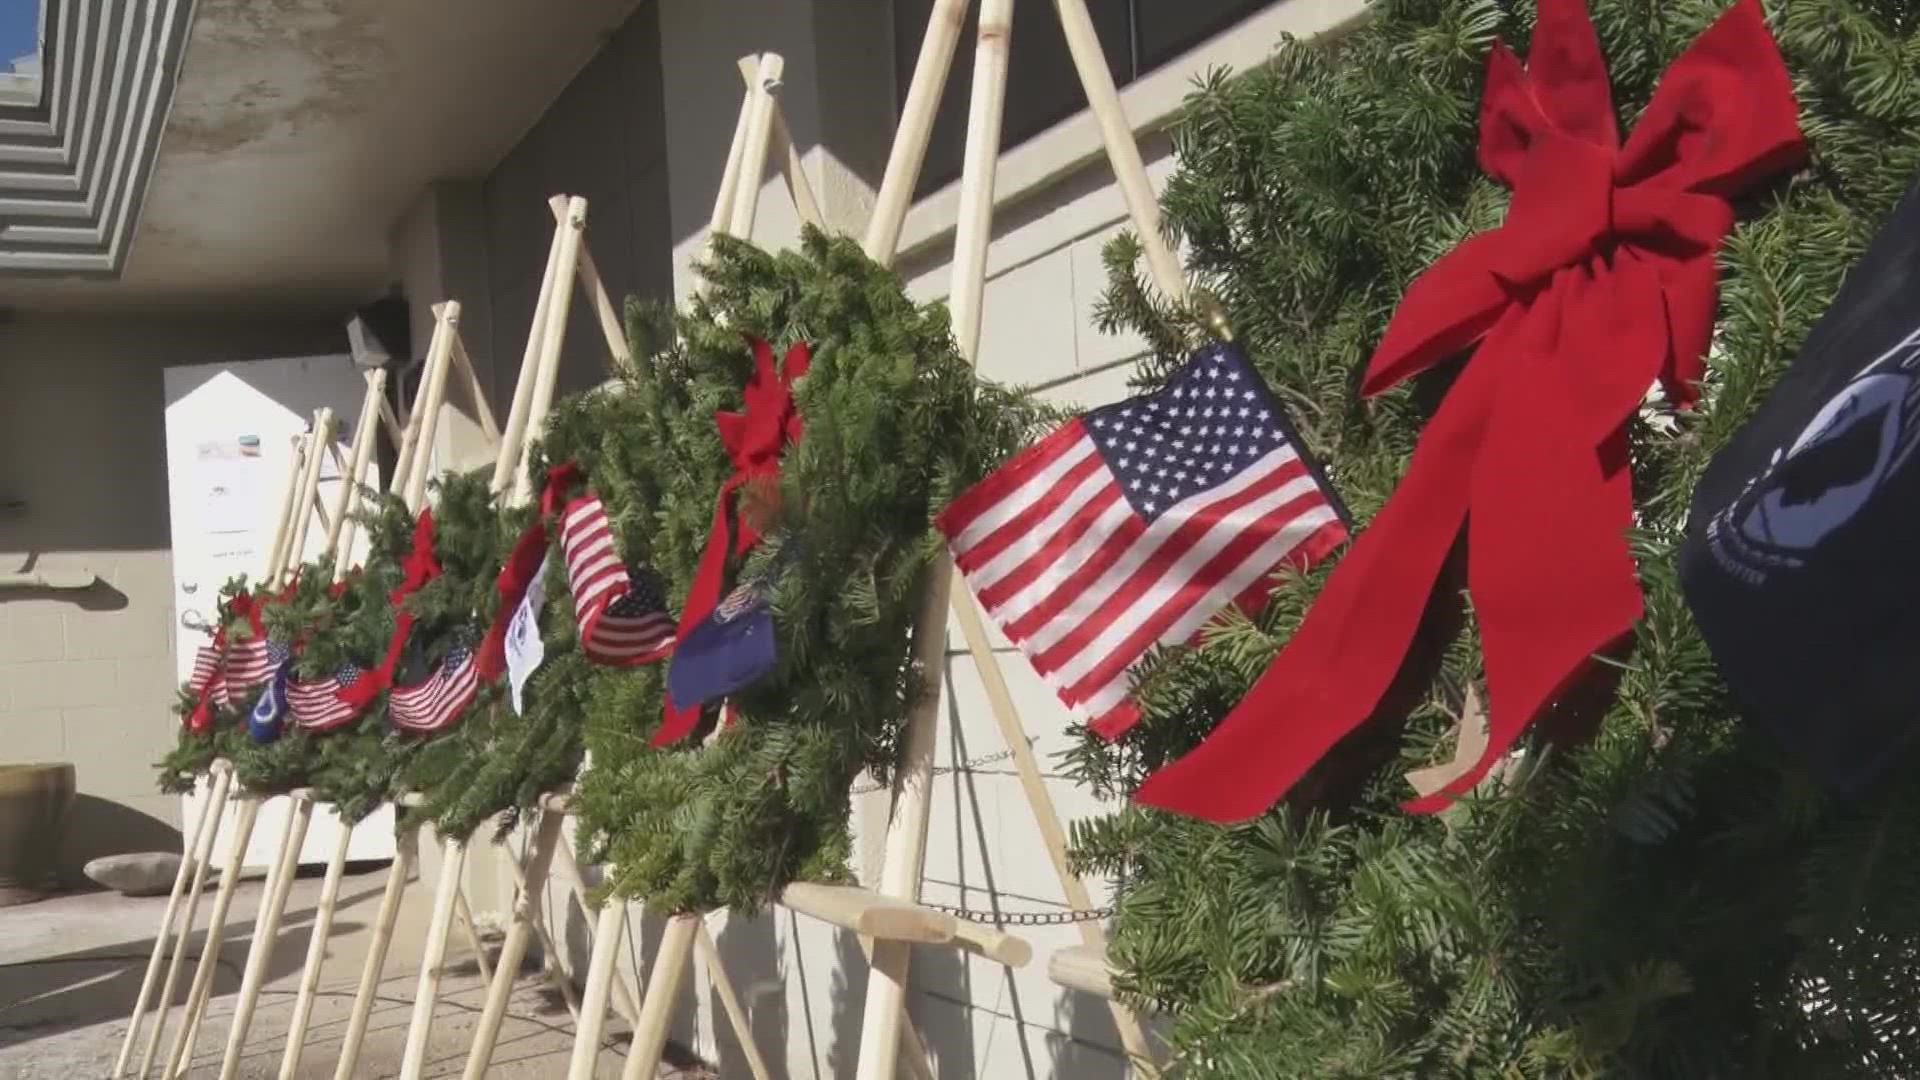 Saturday morning, 680 wreaths were placed on graves to honor the lives of fallen veterans.